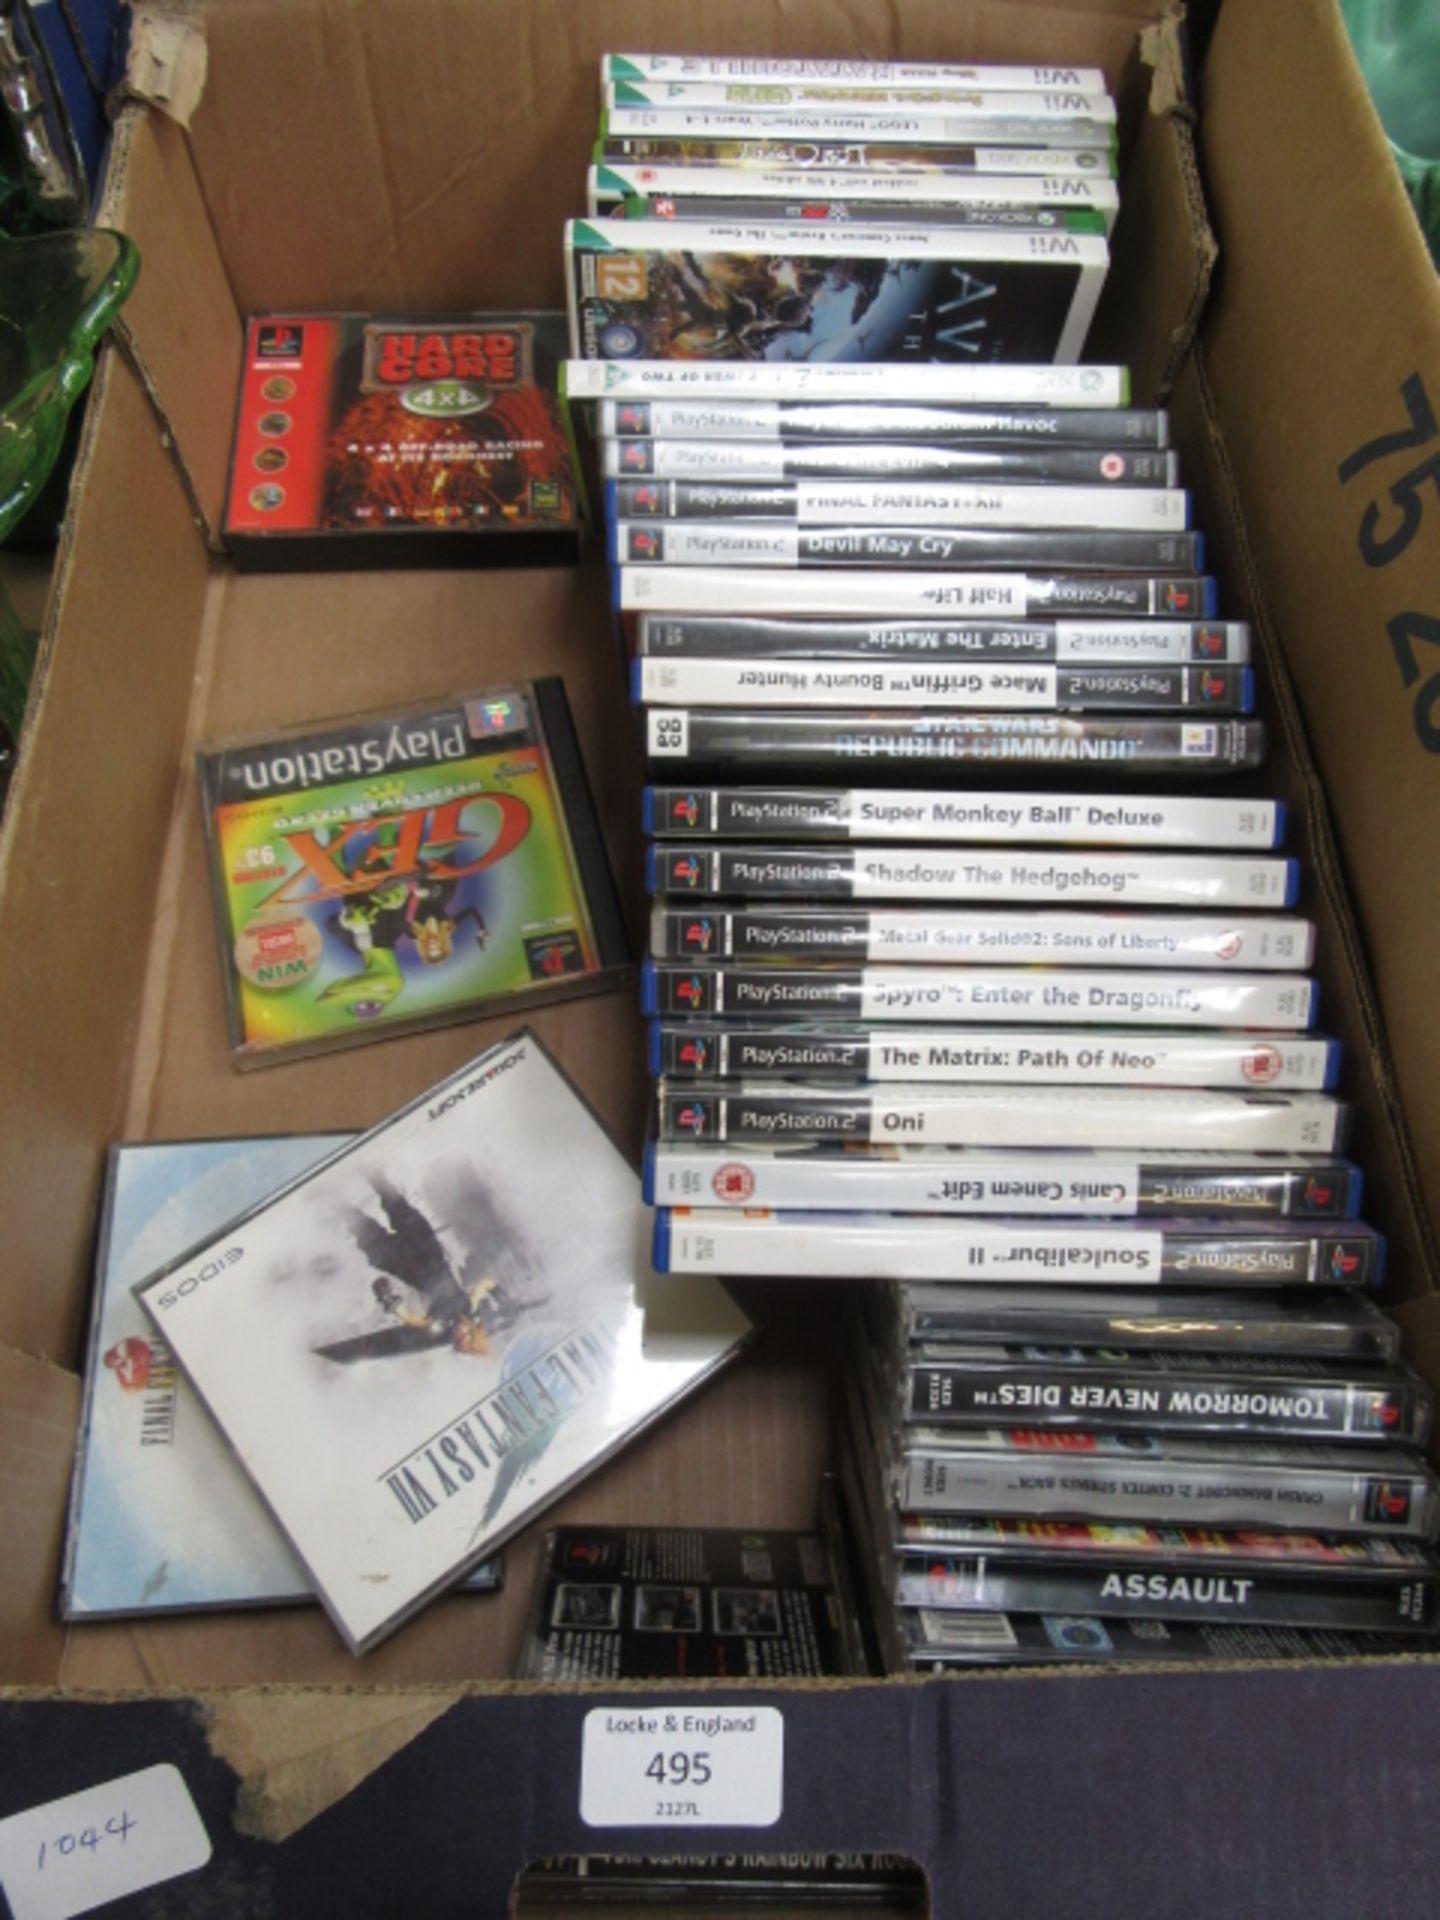 A tray containing a quantity of Playstation Two games, Wii games etc.